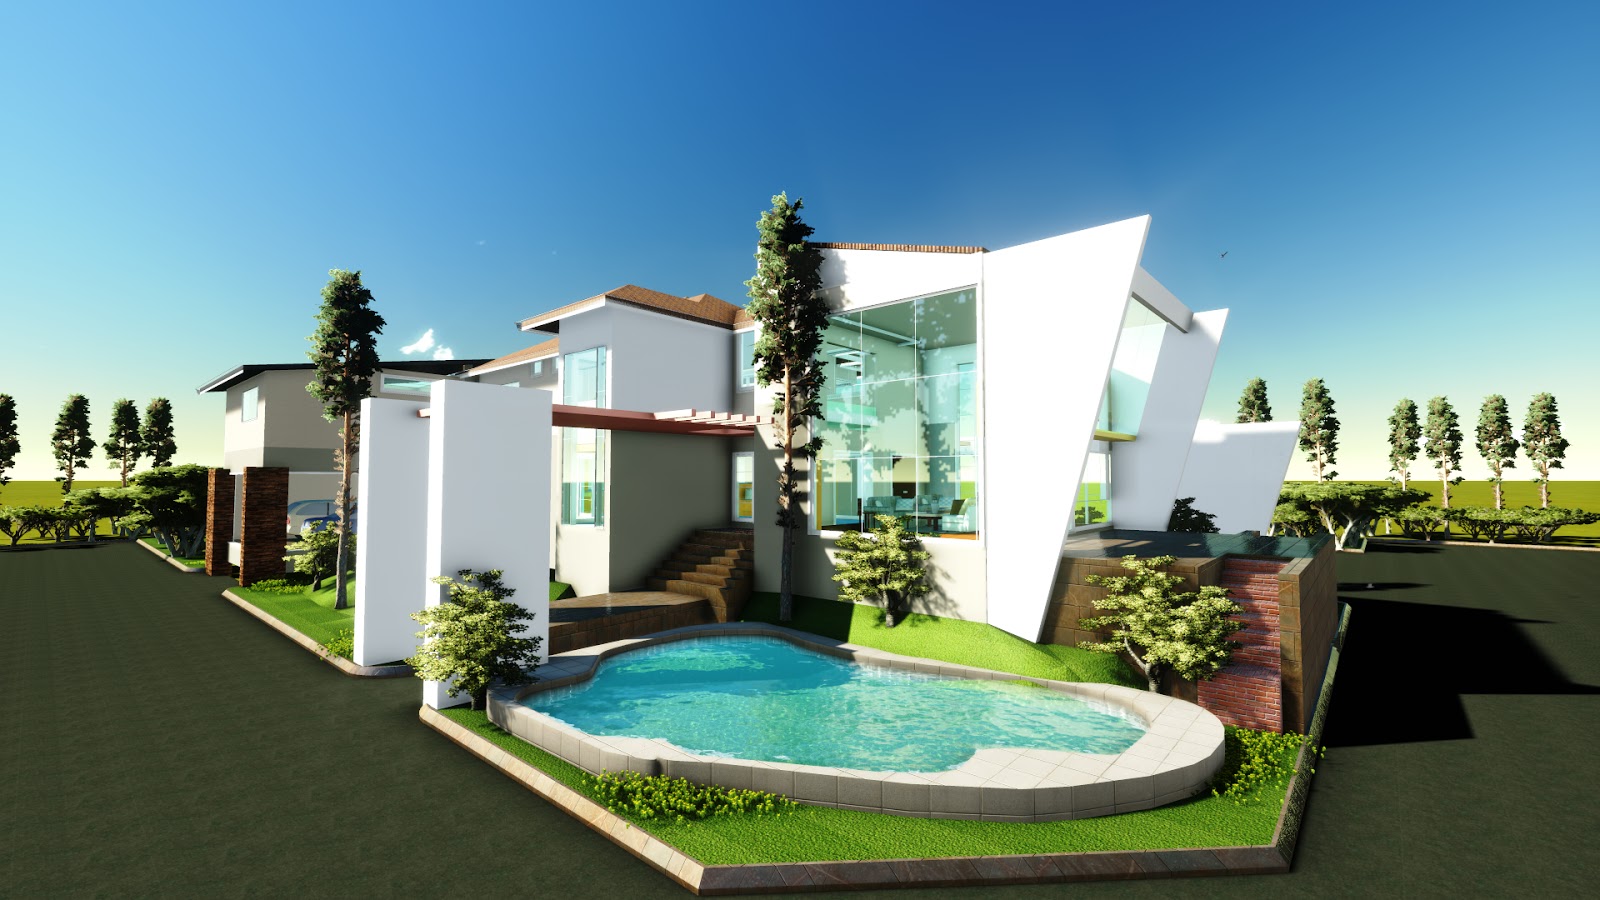 House Designs In The Philippines In Iloilo By Erecre Group Realty